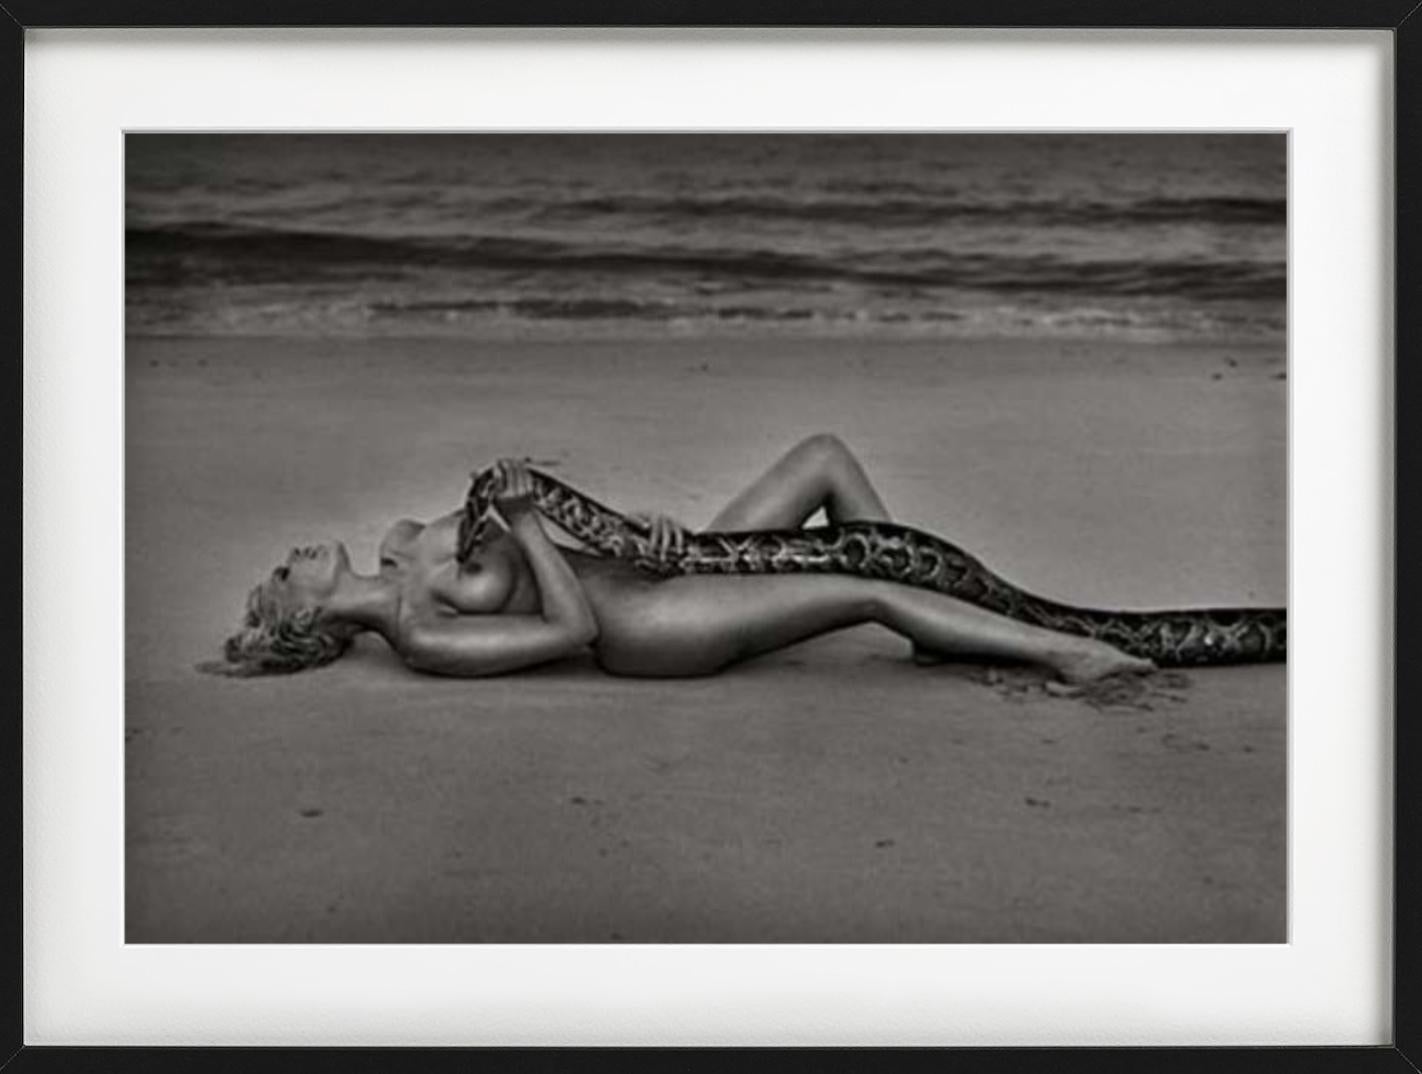 'Yvonne, Thailand' - Nude with snake on the Beach, fine art photography, 1999 - Contemporary Photograph by Andreas H. Bitesnich